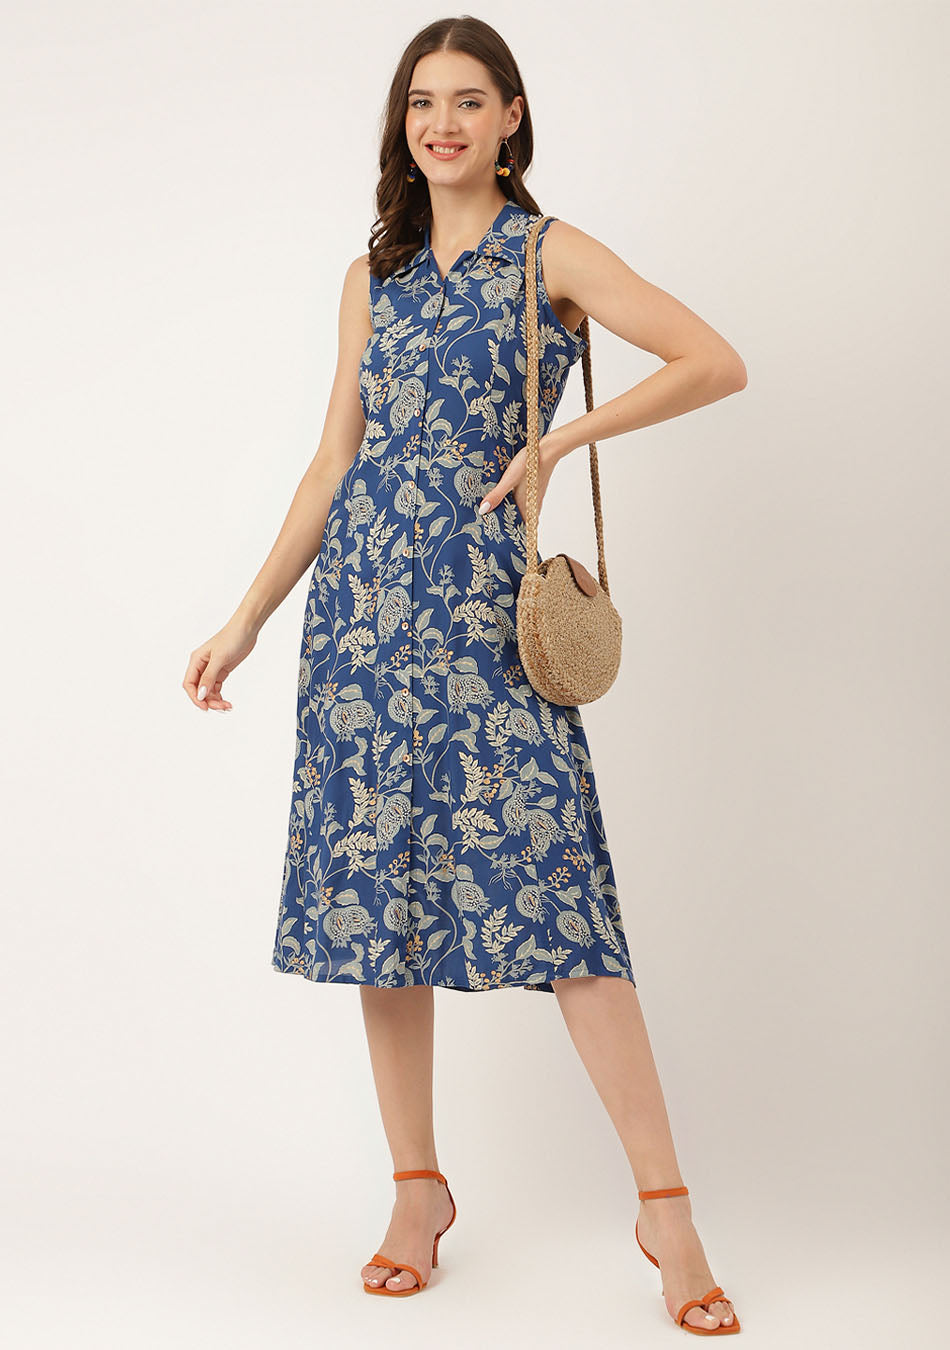 Royal Blue Floral Printed Rayon A-Line Midi Dress with Attached Sleeves